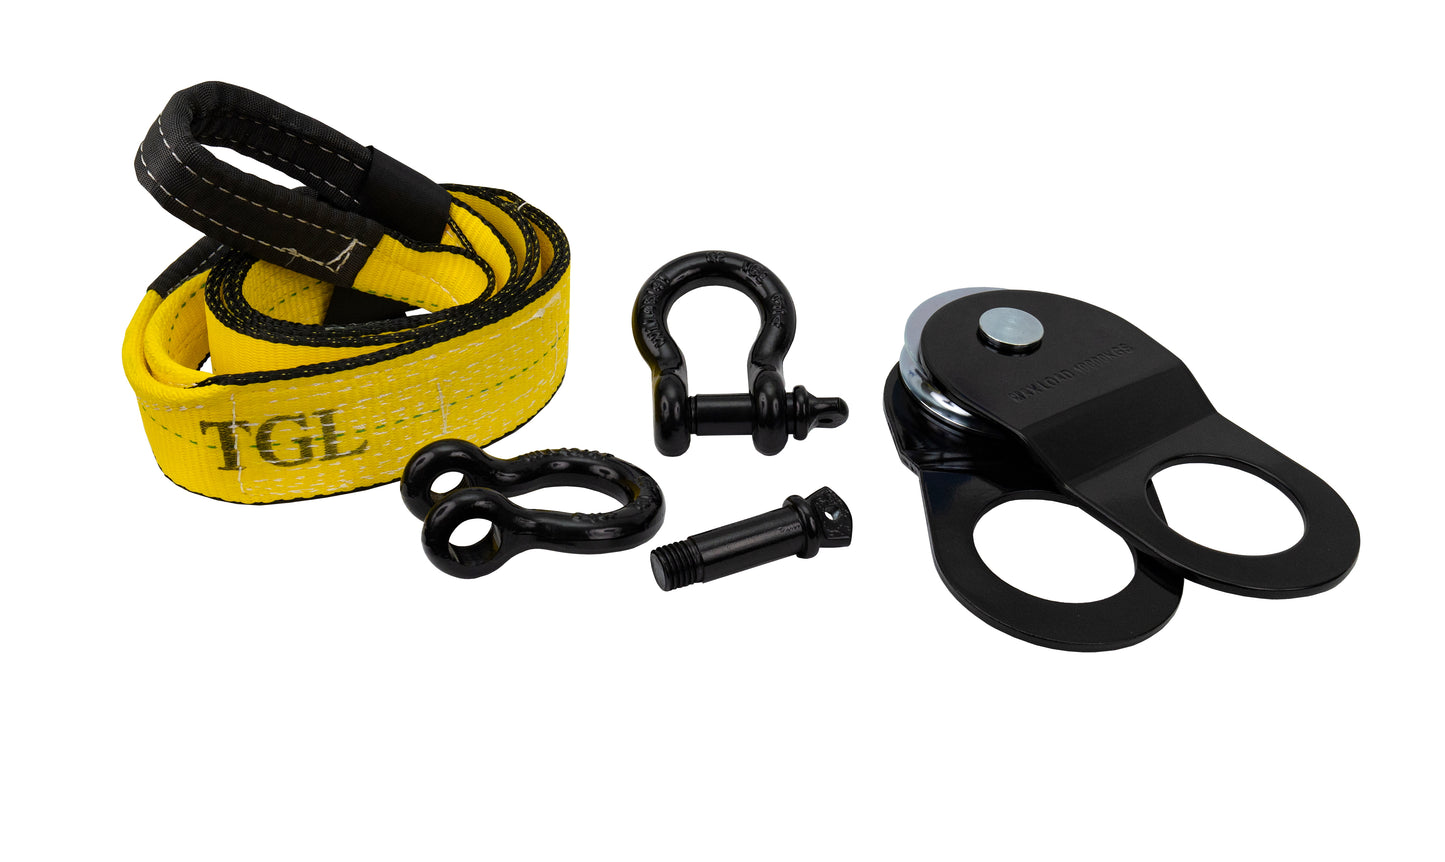 TGL 3 inch, 8 Foot Tree Saver, Tow Strap with D Ring Shackle and 10 Ton Snatch Block